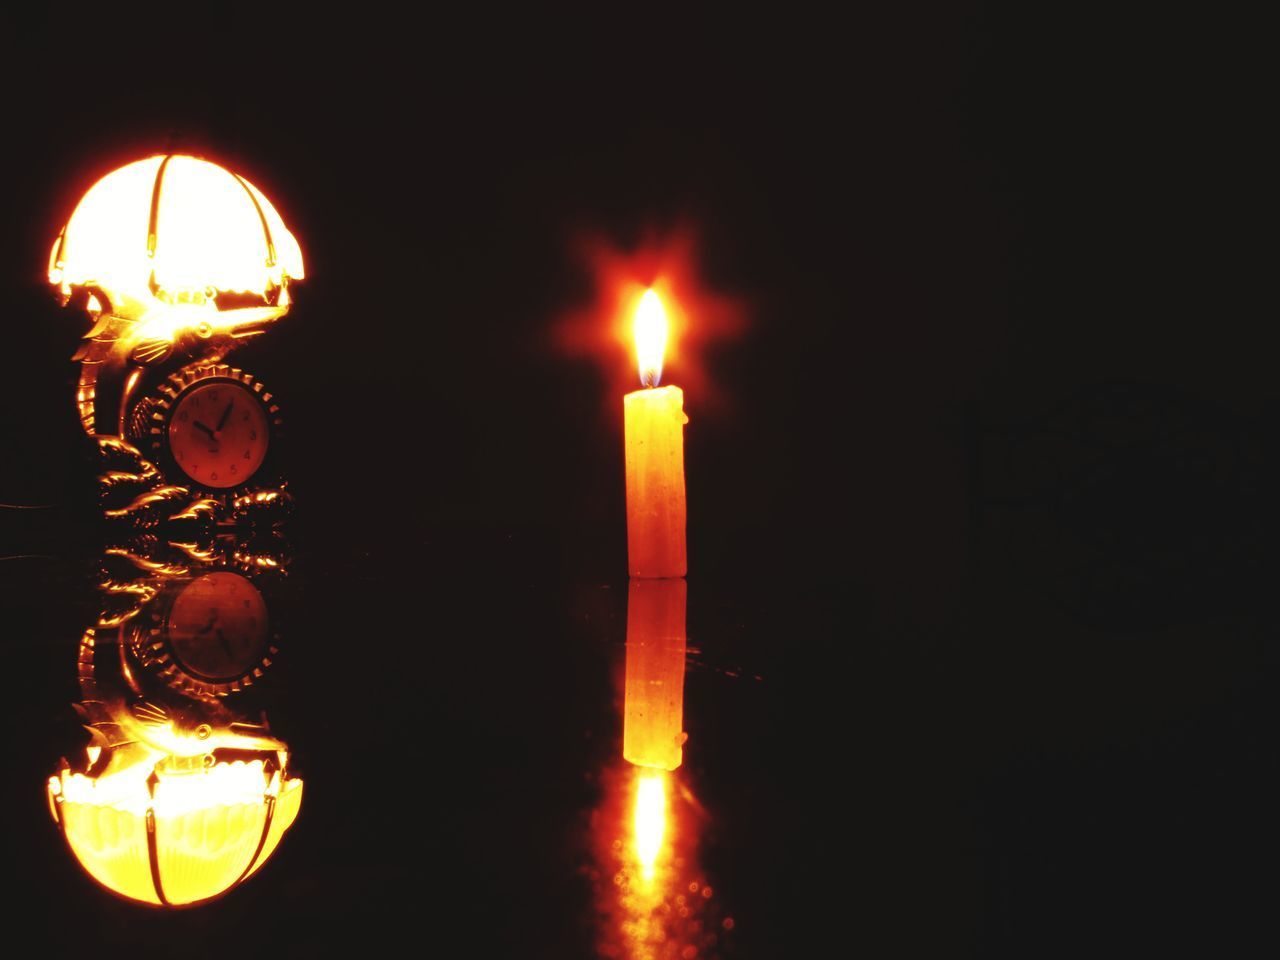 CLOSE-UP OF LIT CANDLES IN DARK